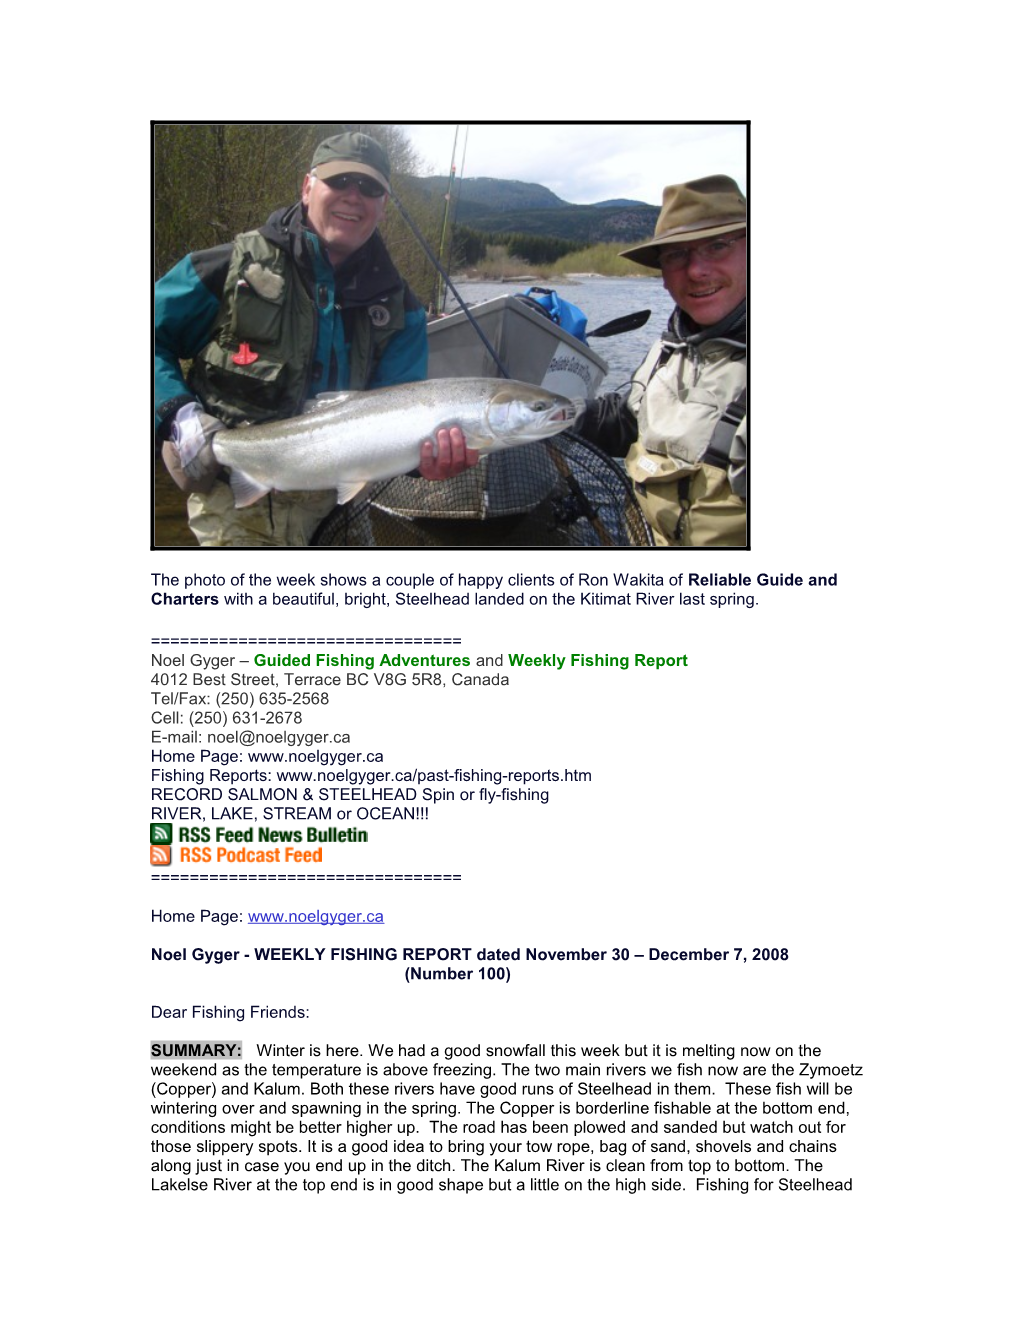 Noel Gyger Guided Fishing Adventures and Weekly Fishing Report